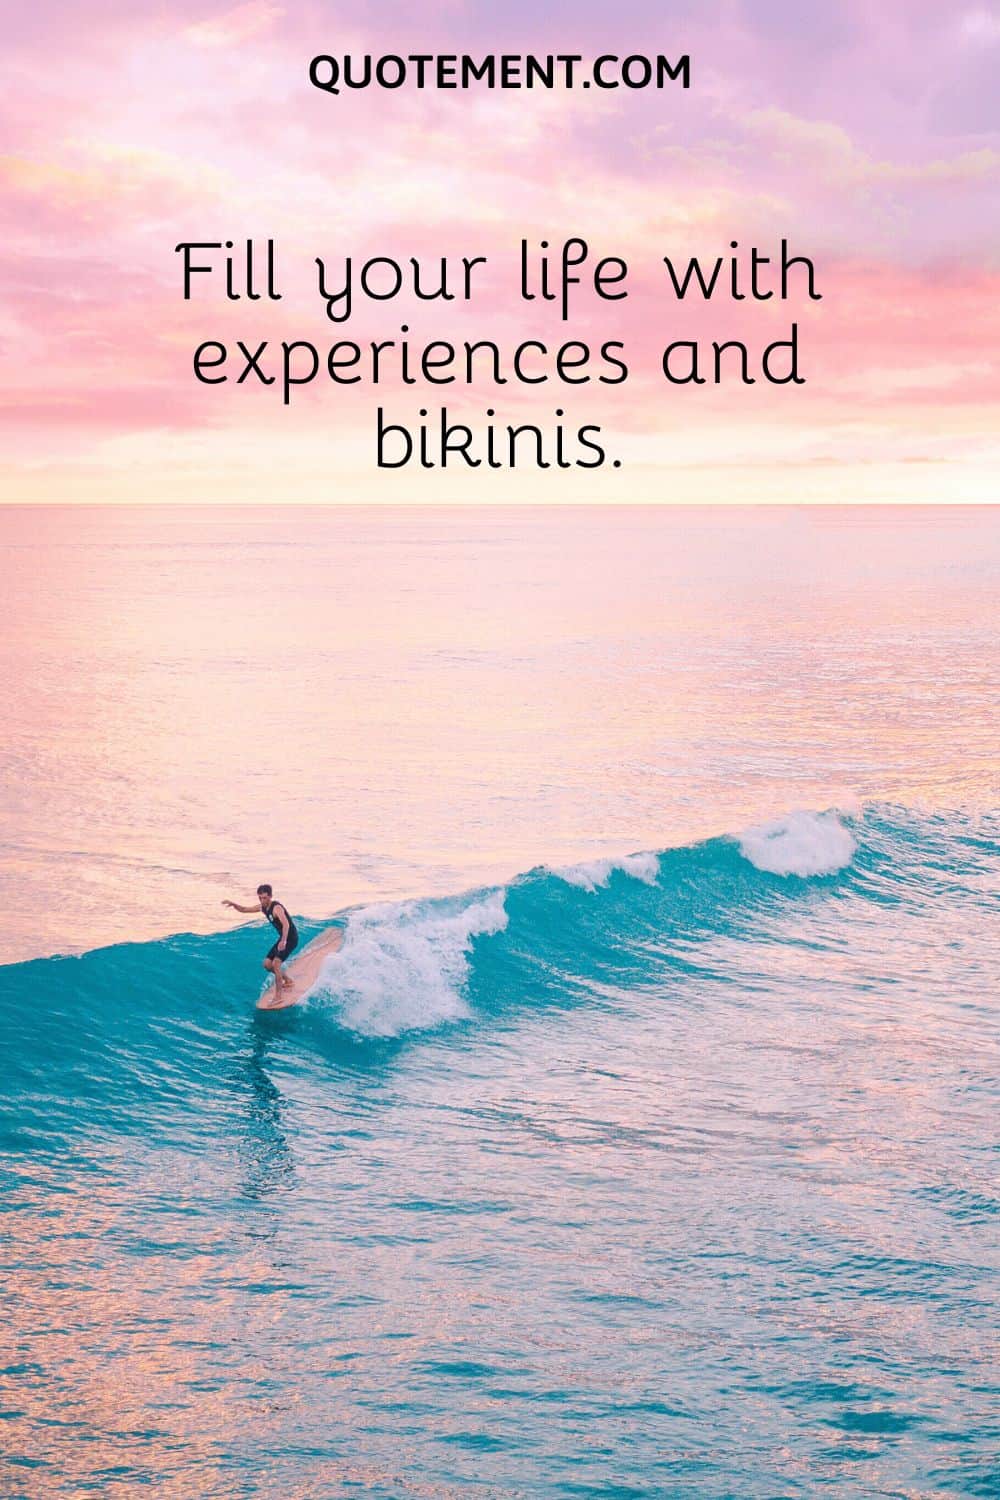 Fill your life with experiences and bikinis.